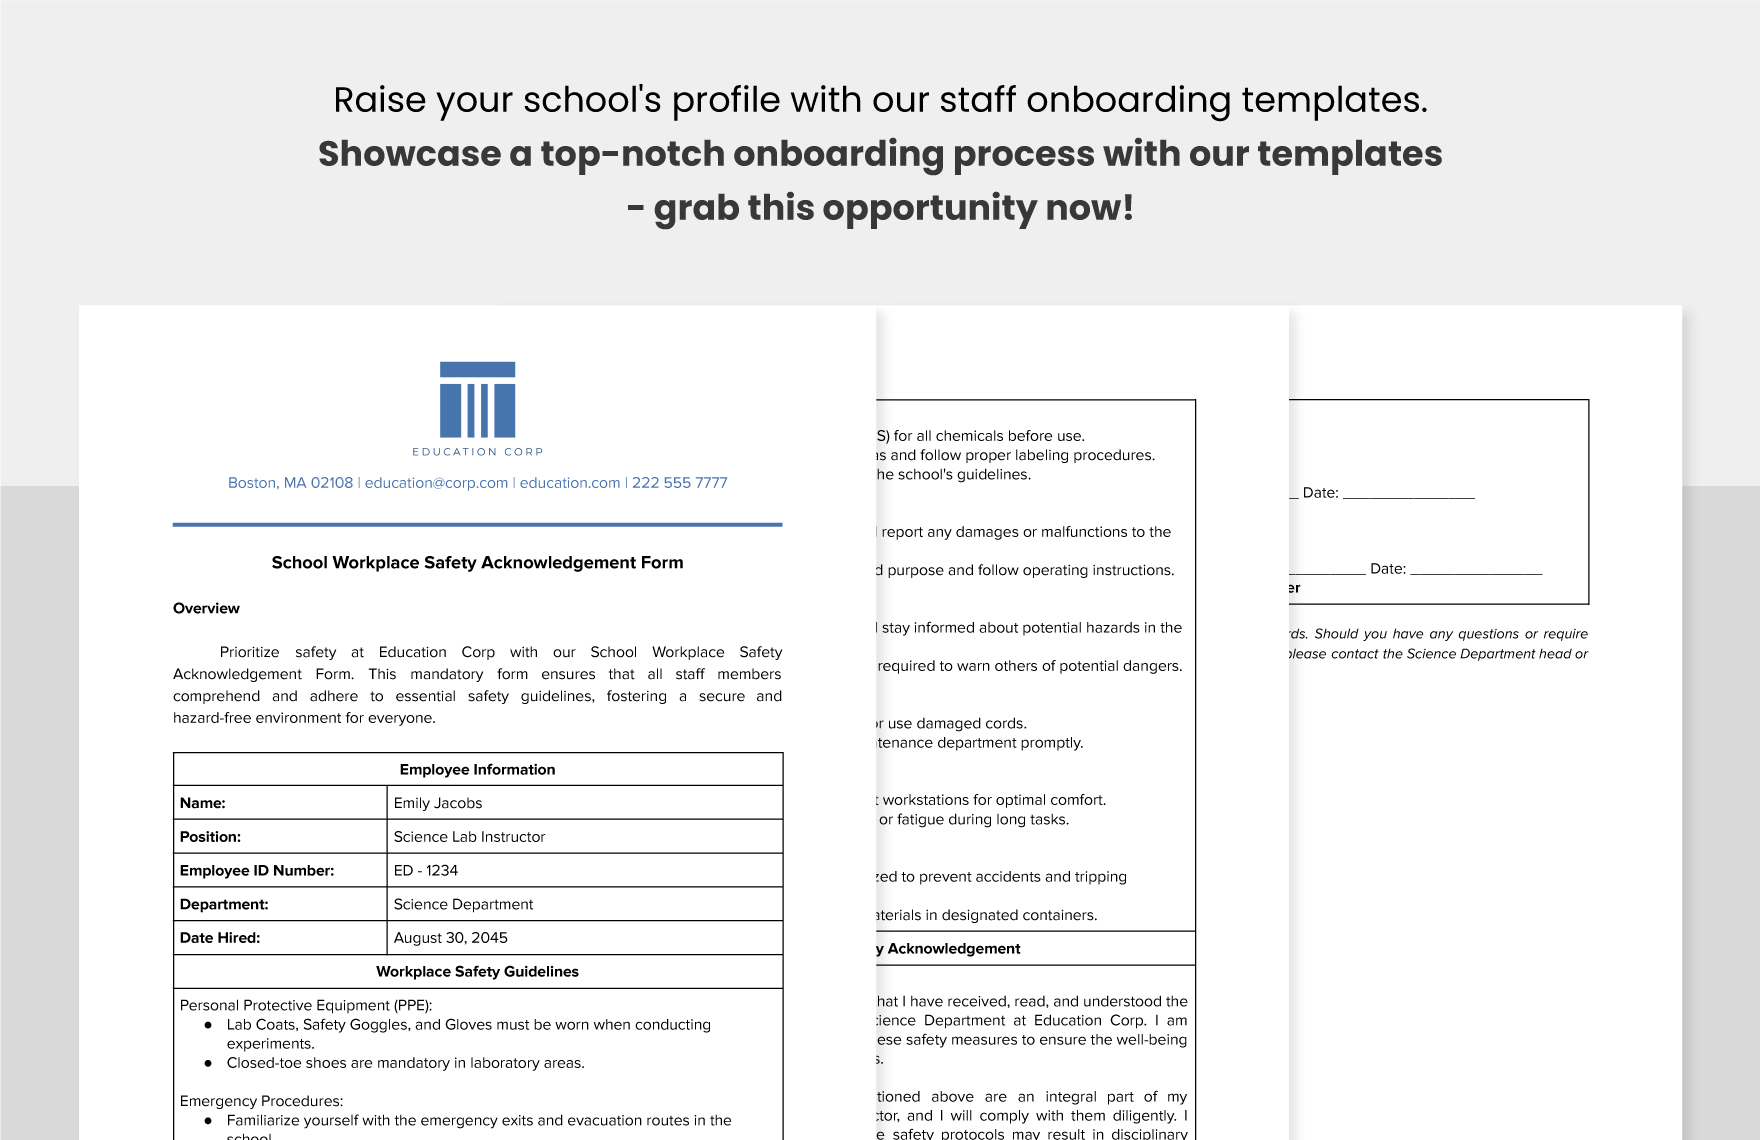 School Workplace Safety Acknowledgement Form Template